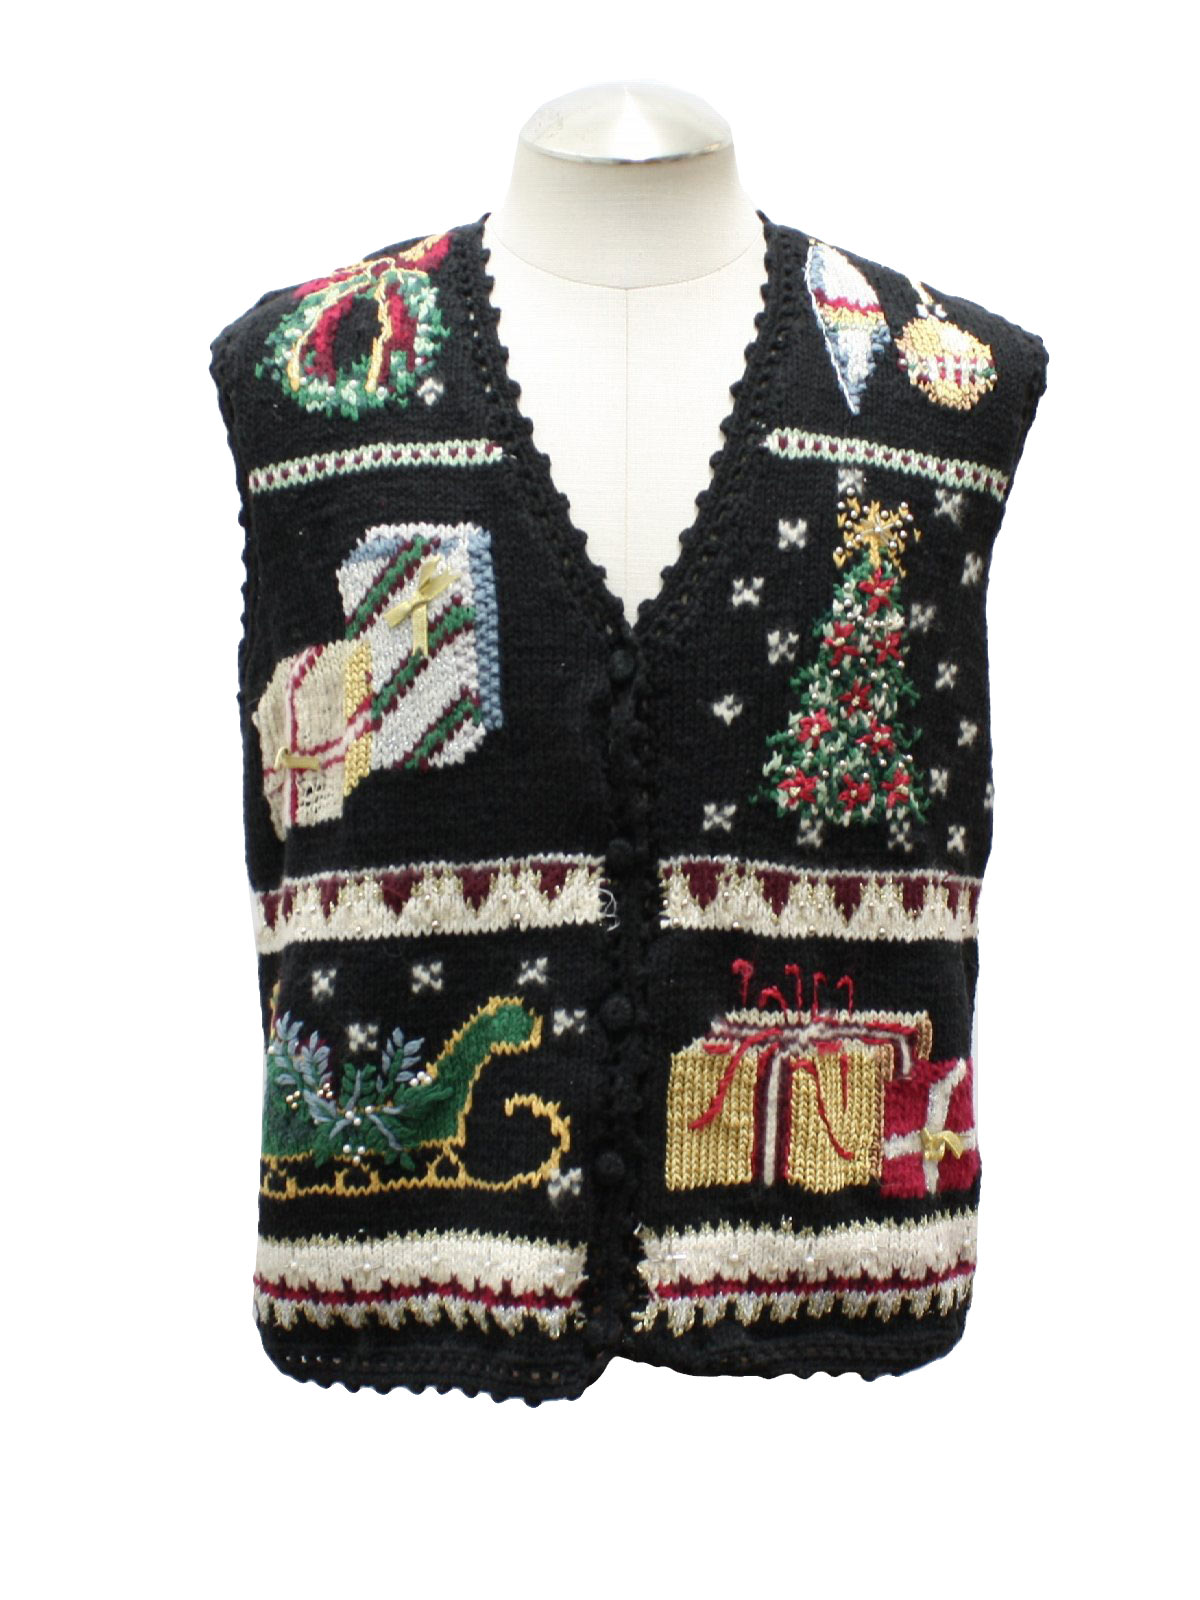 Womens Ugly Christmas Sweater Vest: -Tiara- Womens black background ...